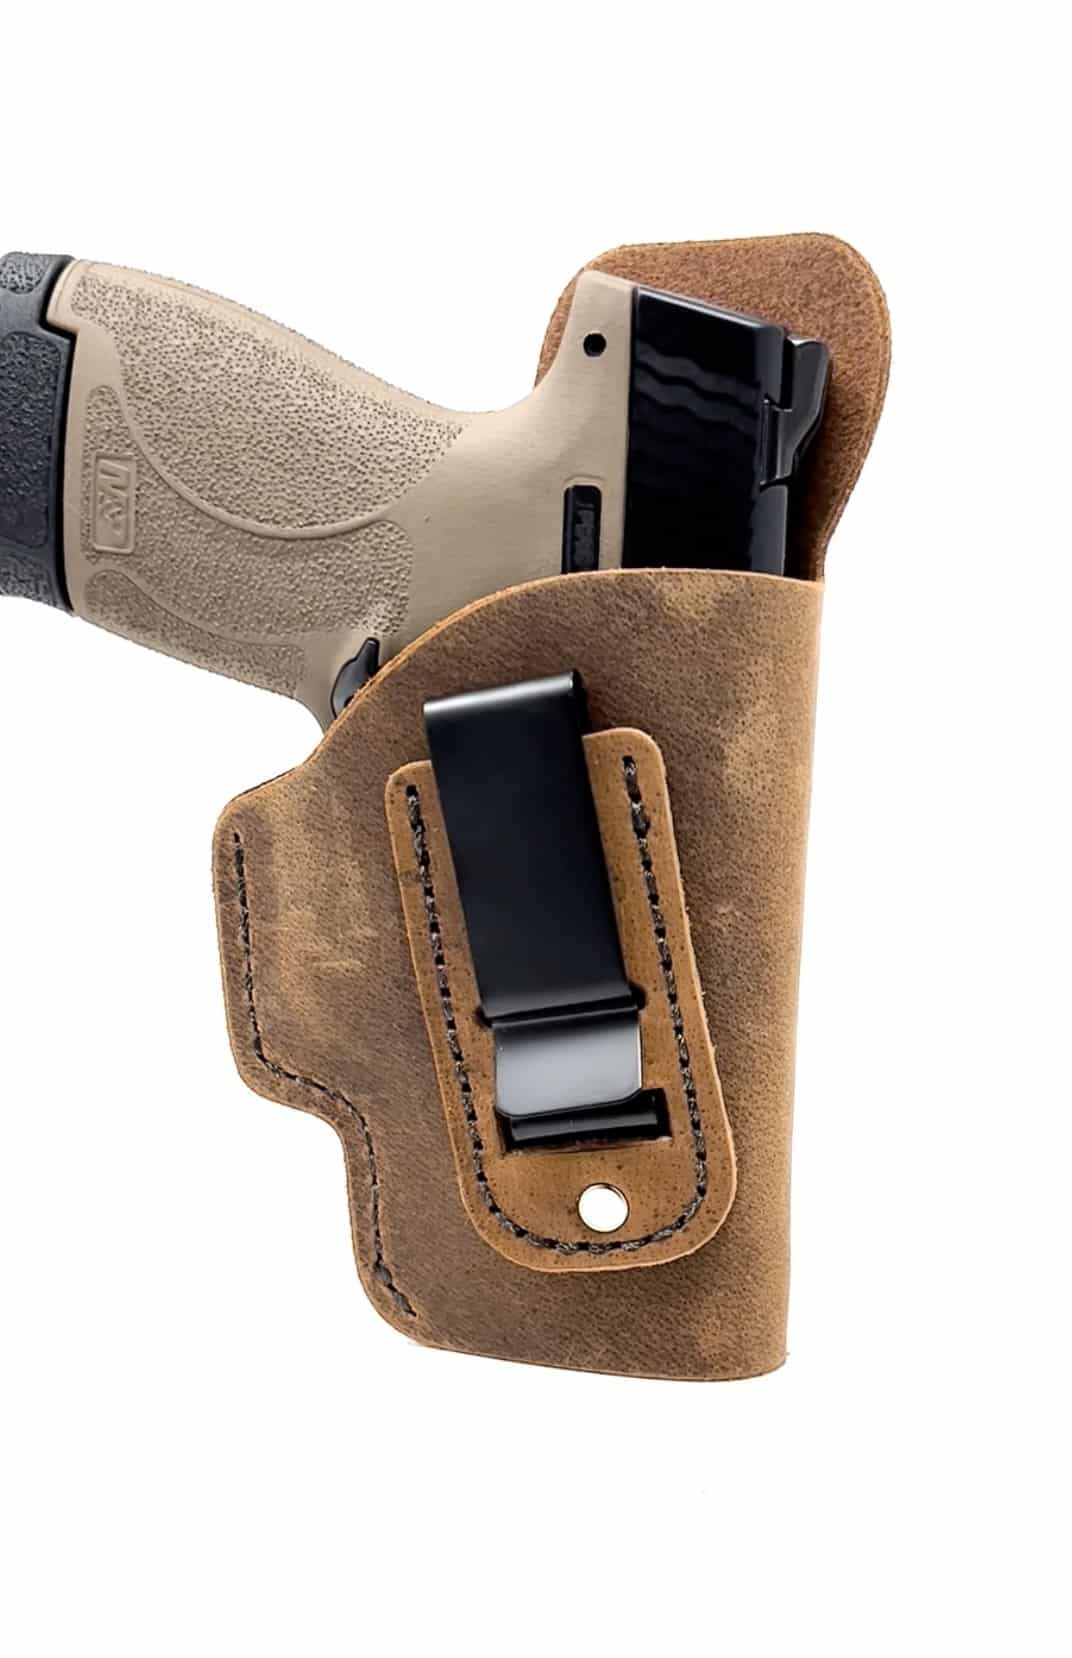 S&W Shield 9/40 IWB Leather Holster - Made in USA - Lifetime Warranty